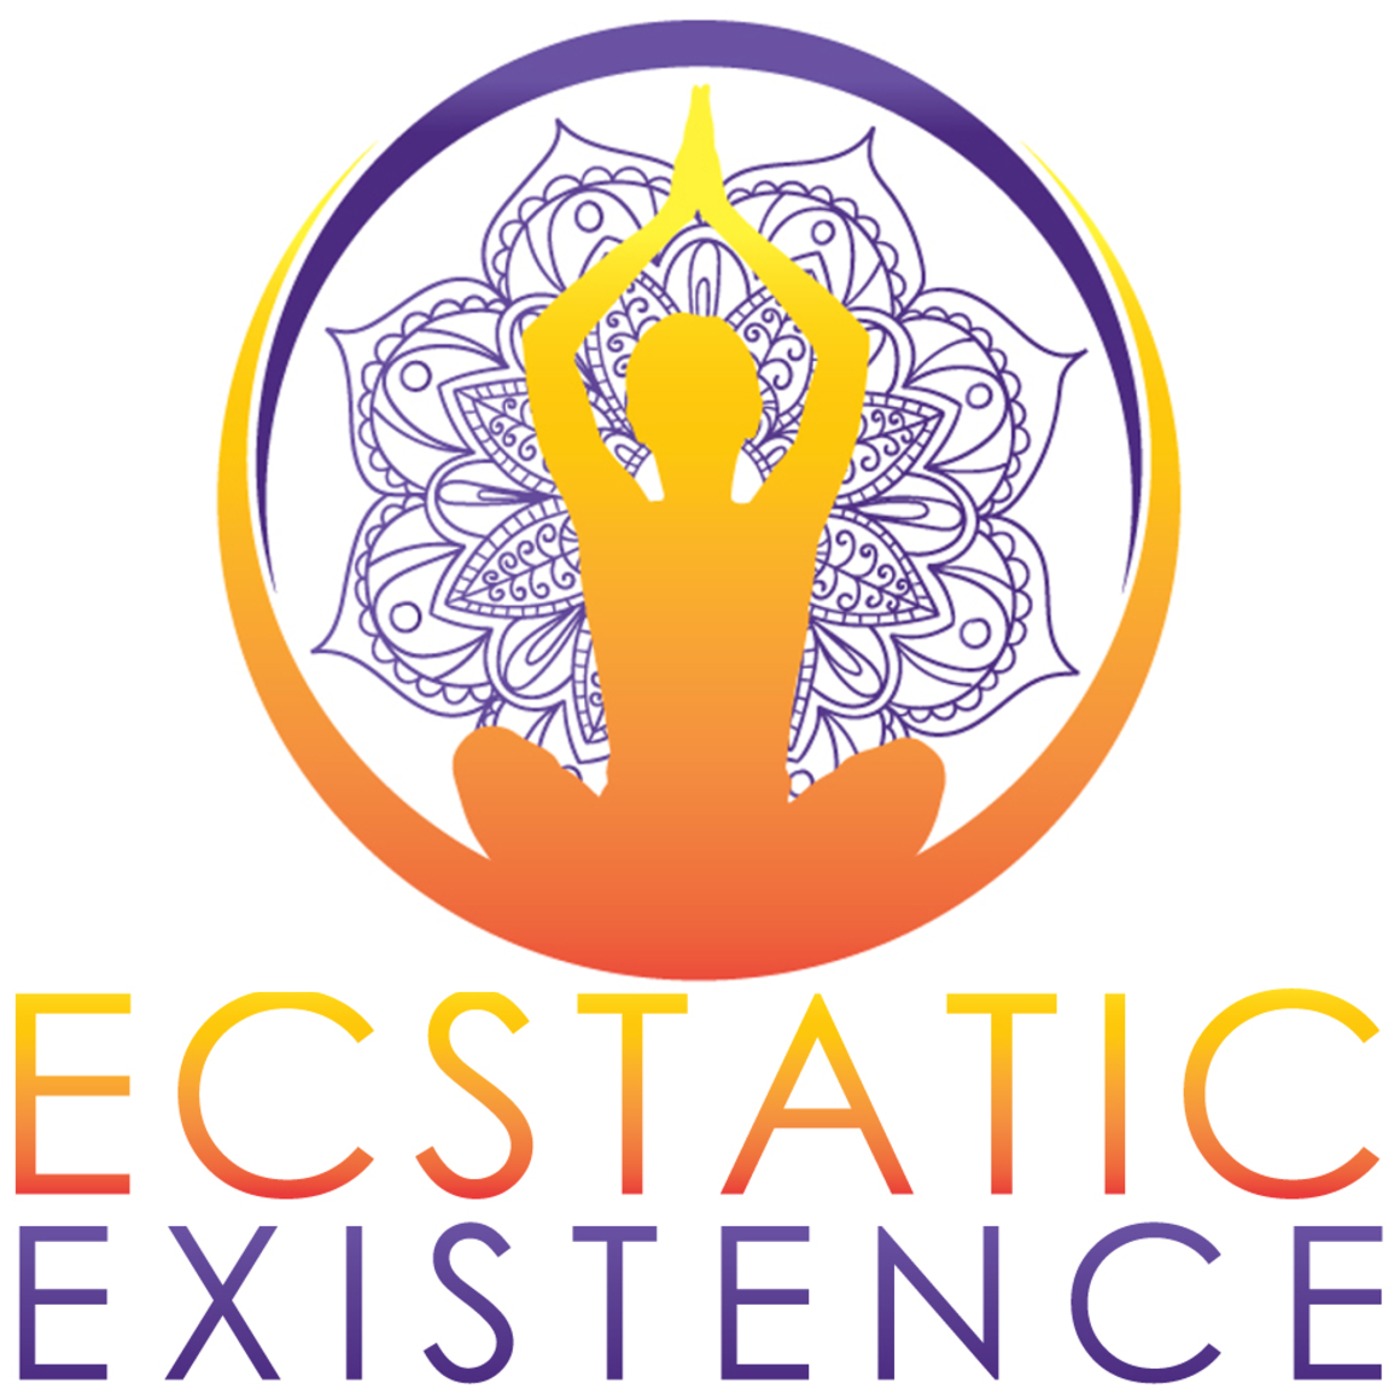 Ecstatic Existence!